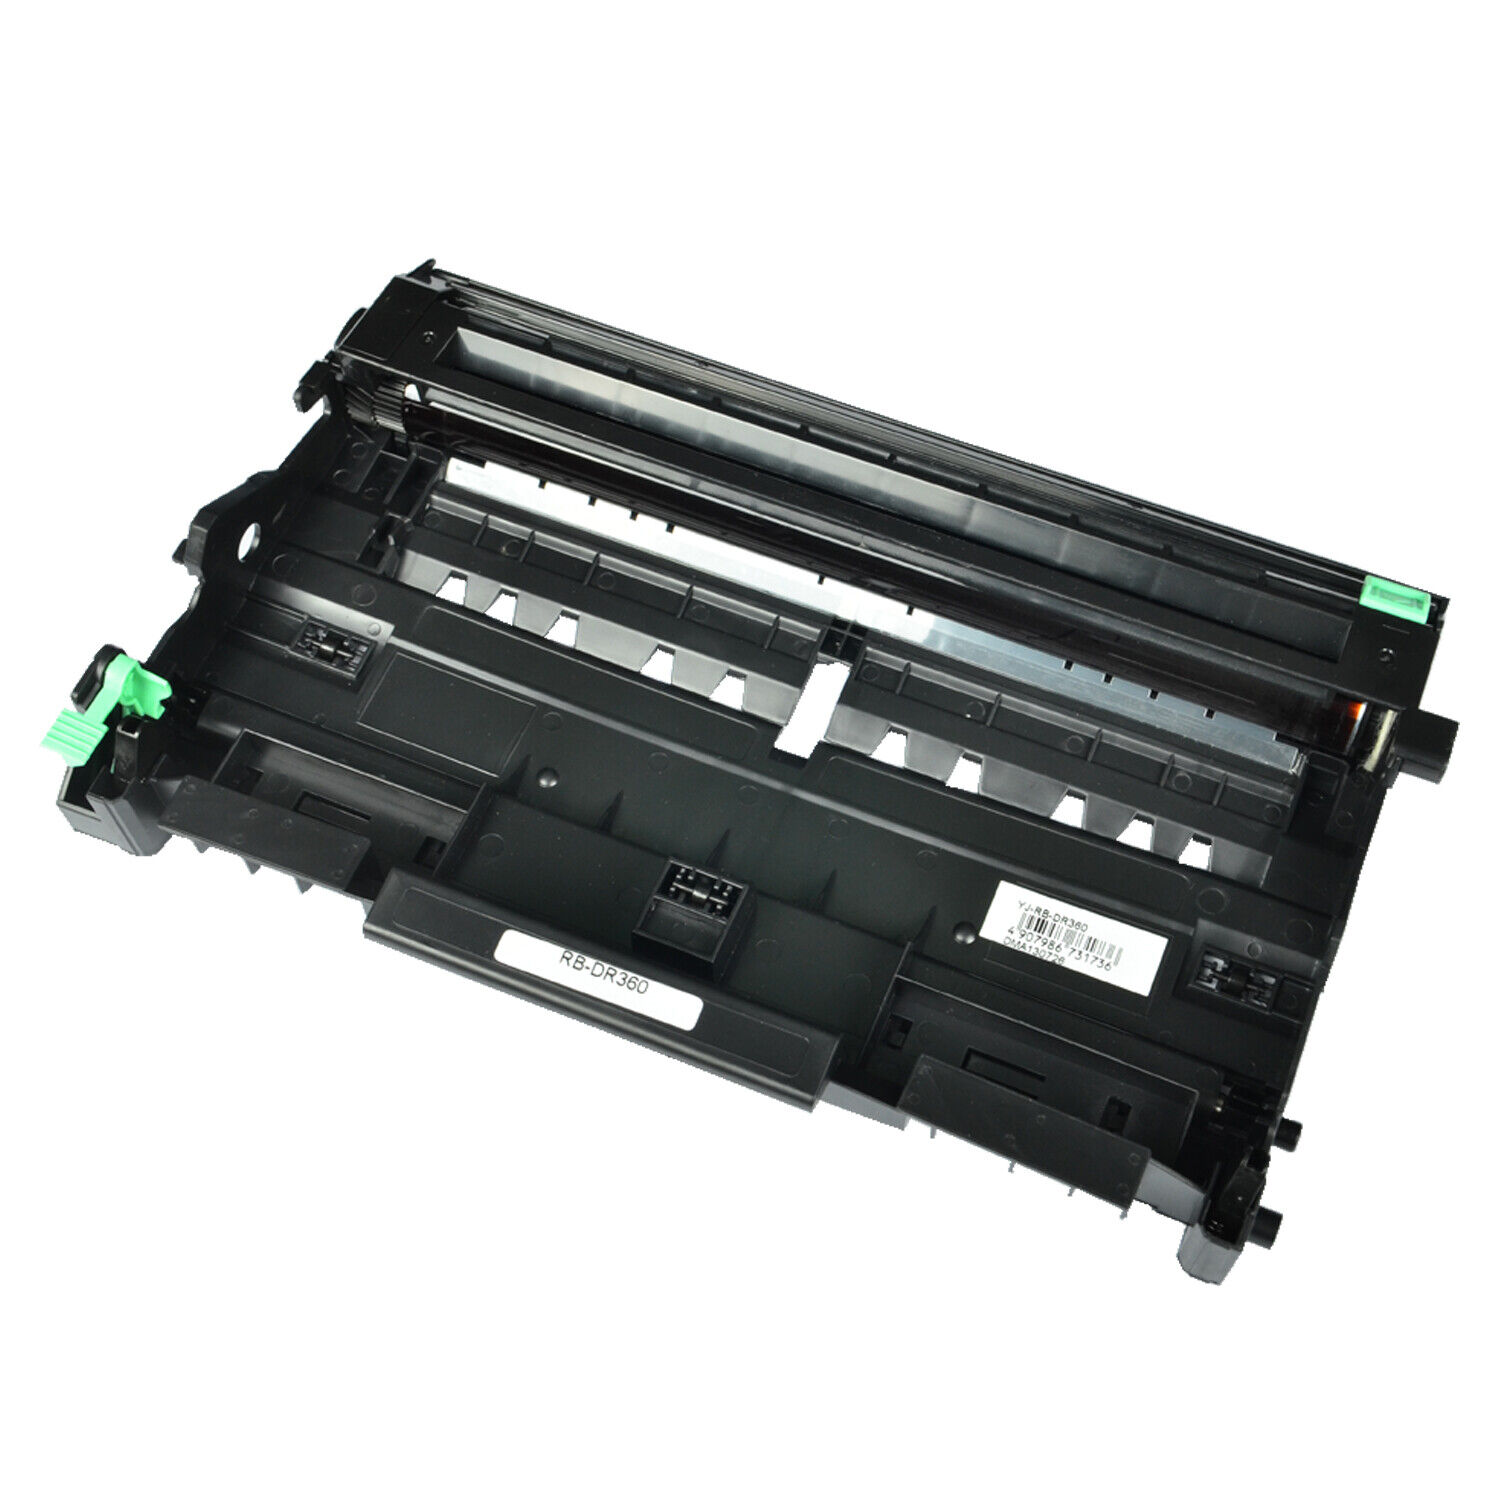 1PK DR360 DR-360 Drum Unit for Brother DR360 DCP-7040 DCP-7045N MFC-7320 7320R